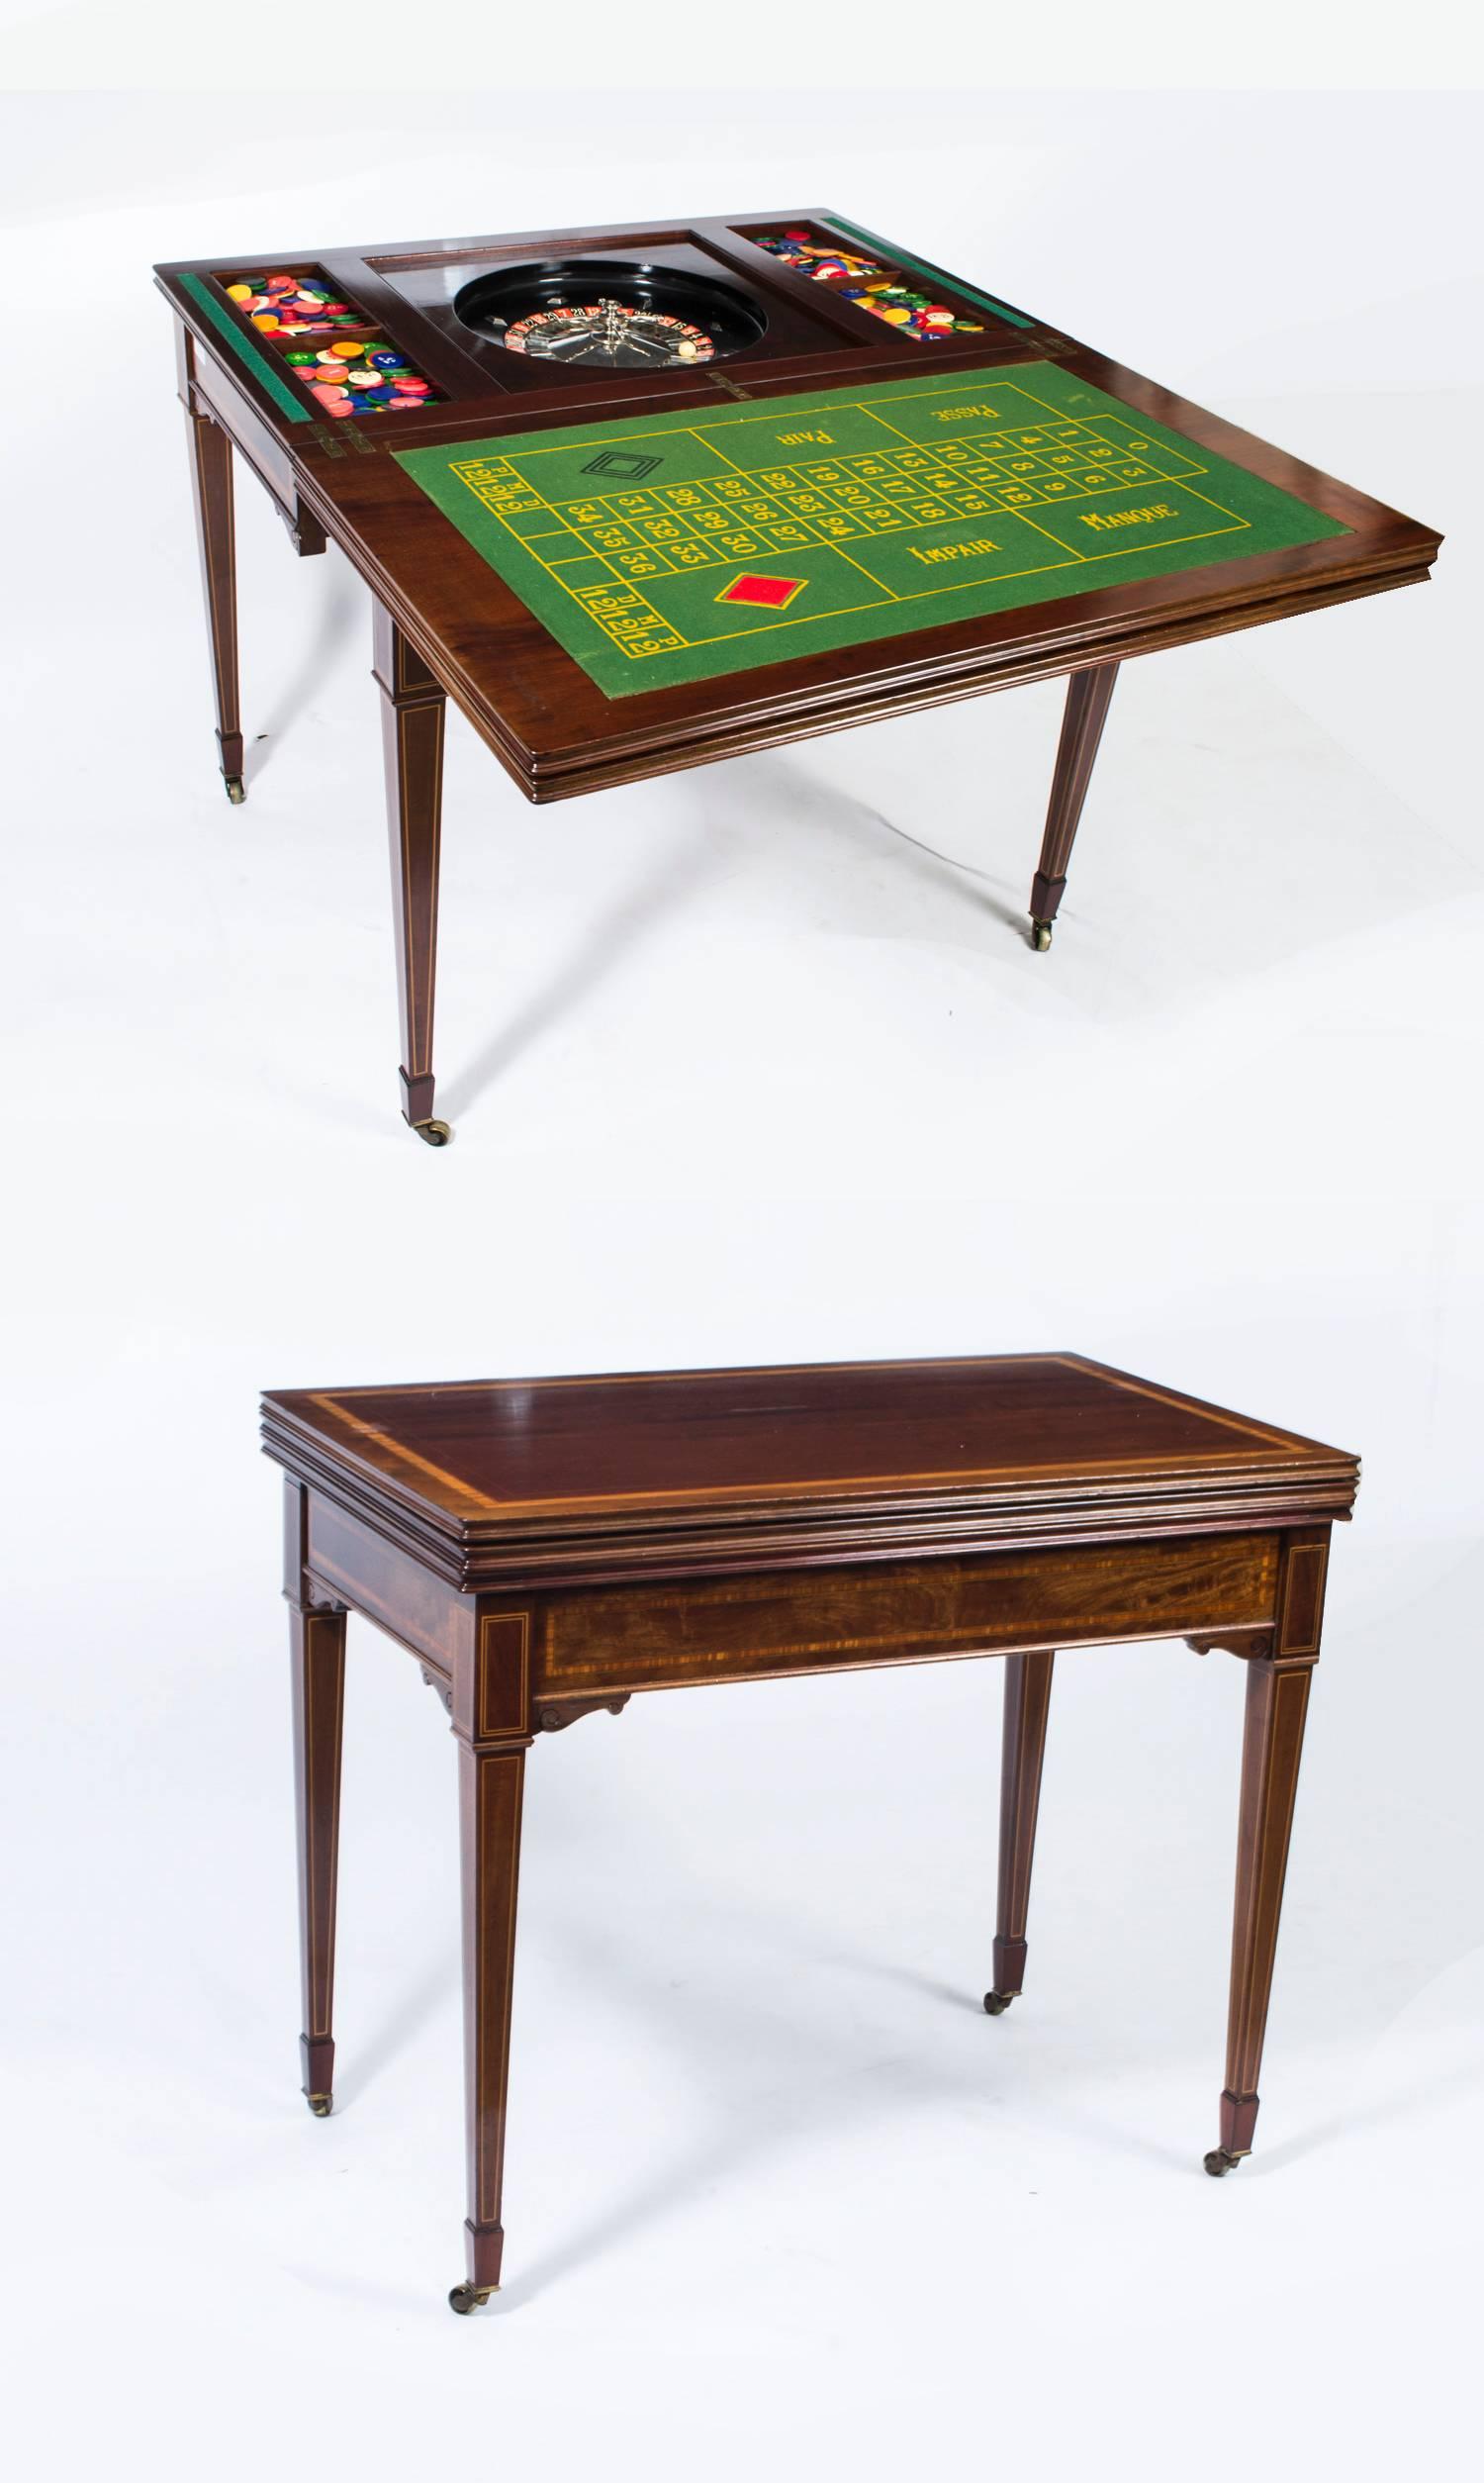 This is a fabulous high quality antique Edwardian mahogany, satinwood crossbanded and line inlaid triple top games table for cards and roulette, circa 1900 in date.

The hinged triple top opens to reveal a fabulous gaming interior for playing